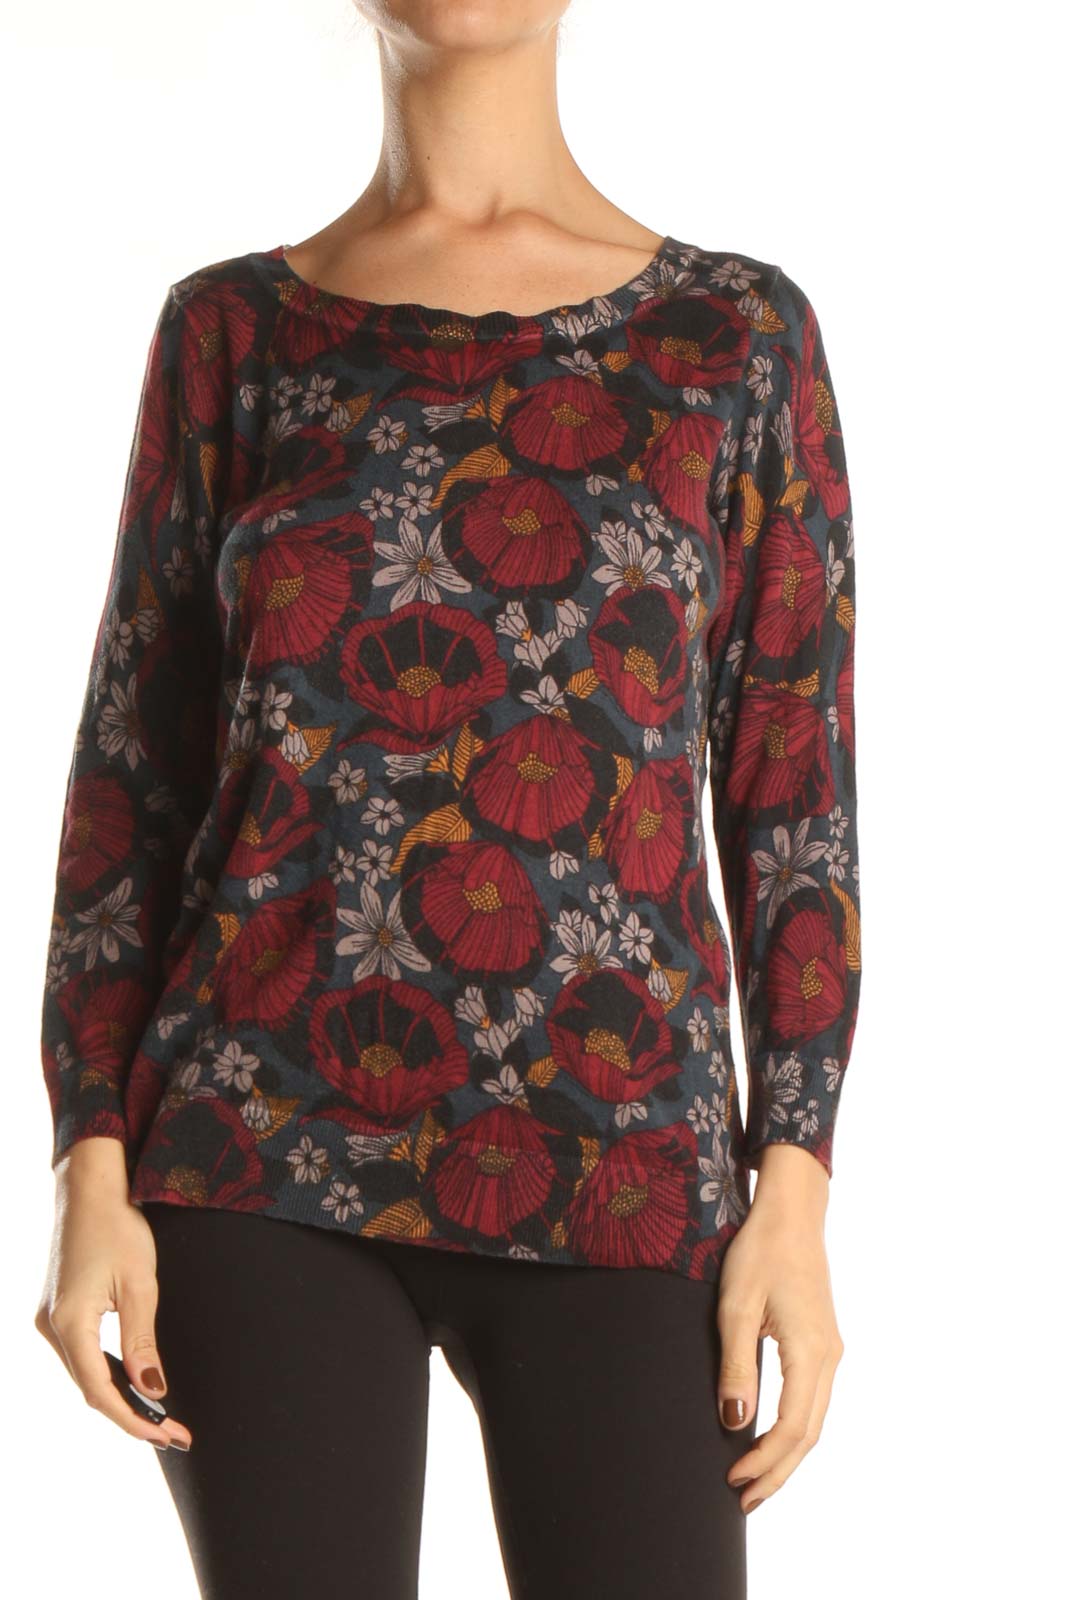 Multicolor Floral Print Retro Long Sleeve Top Front